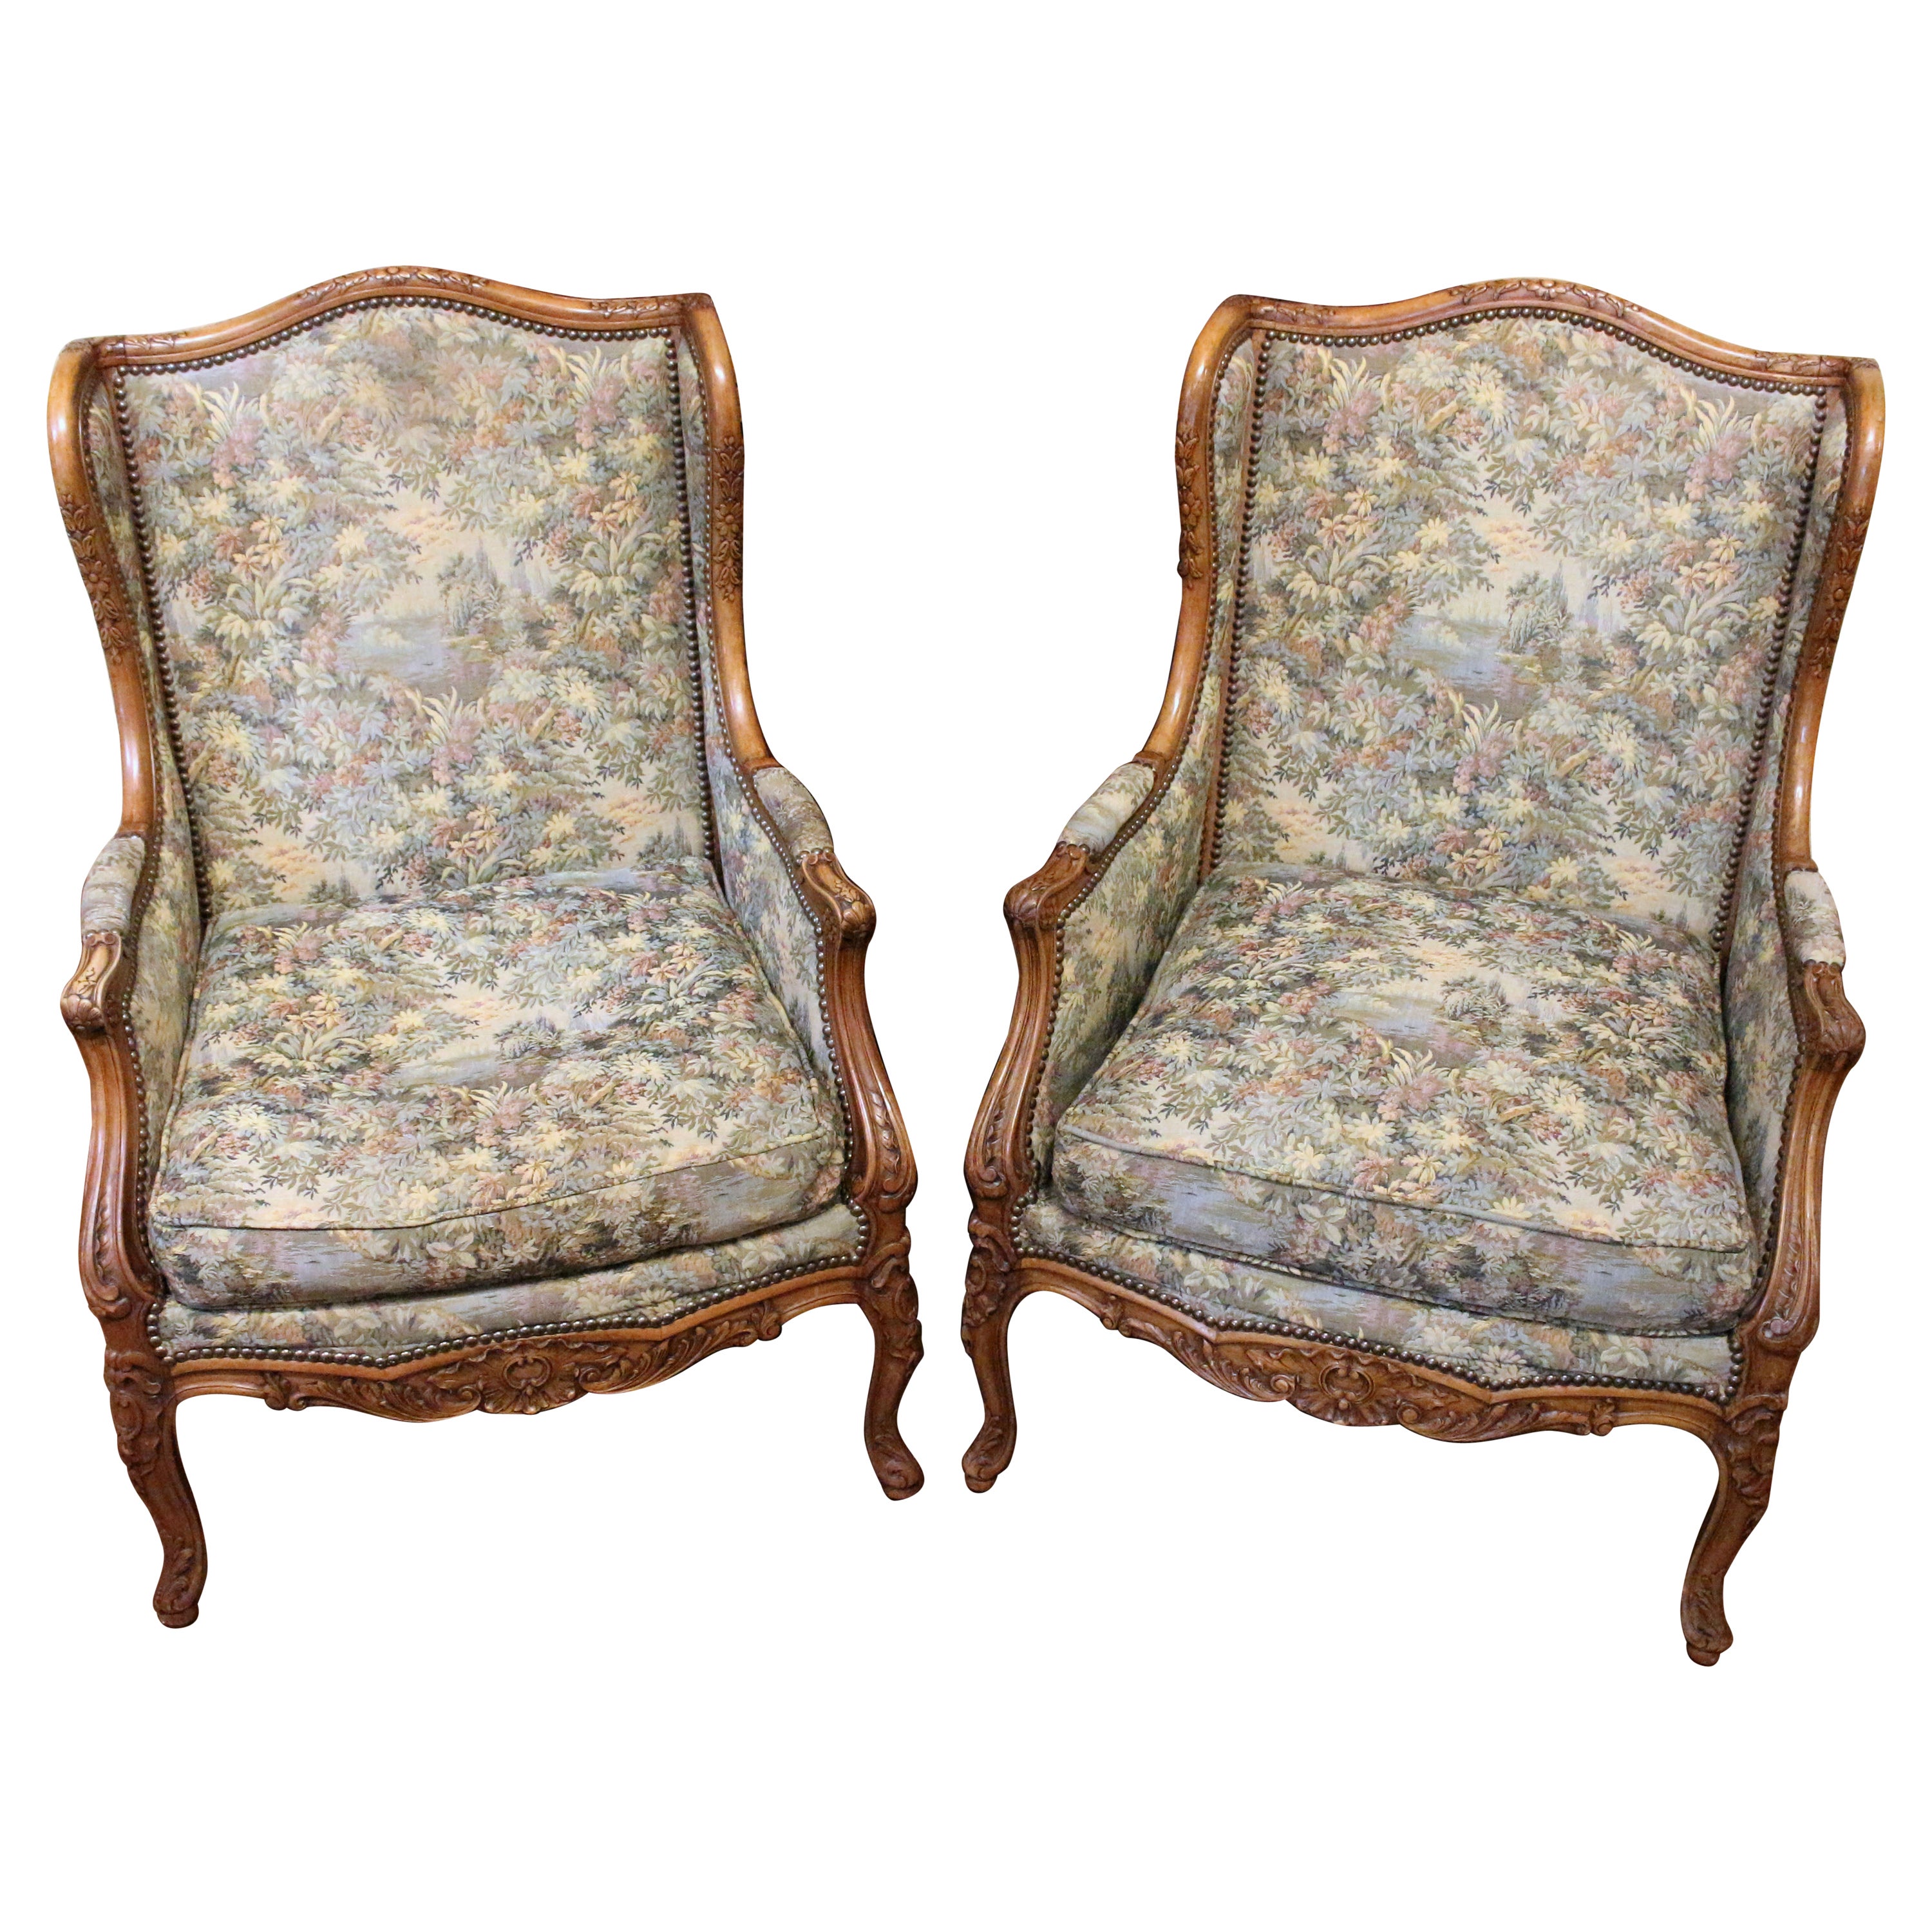 2nd Quarter 20th Century French Pair of Louis XV style Bergeres